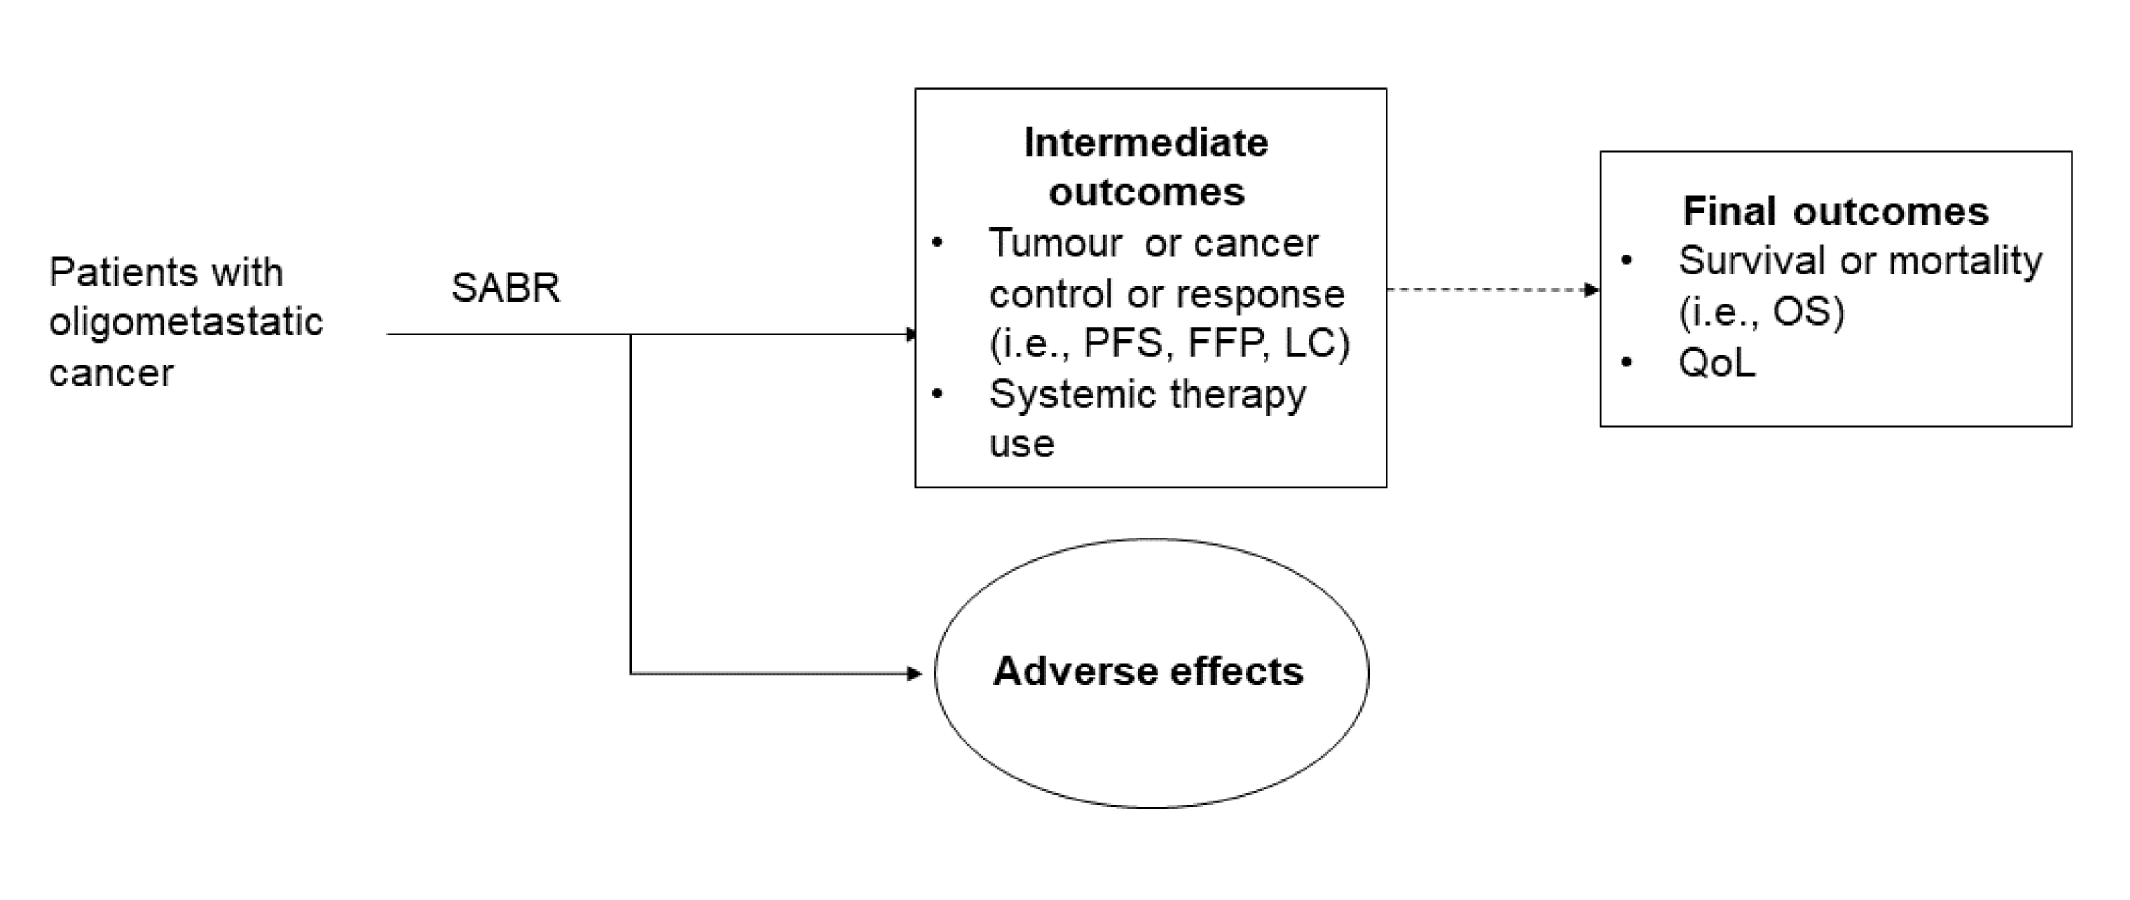 This schematic shows the expected intermediate and final outcomes of SABR treatment in patients with oligometastatic cancer.